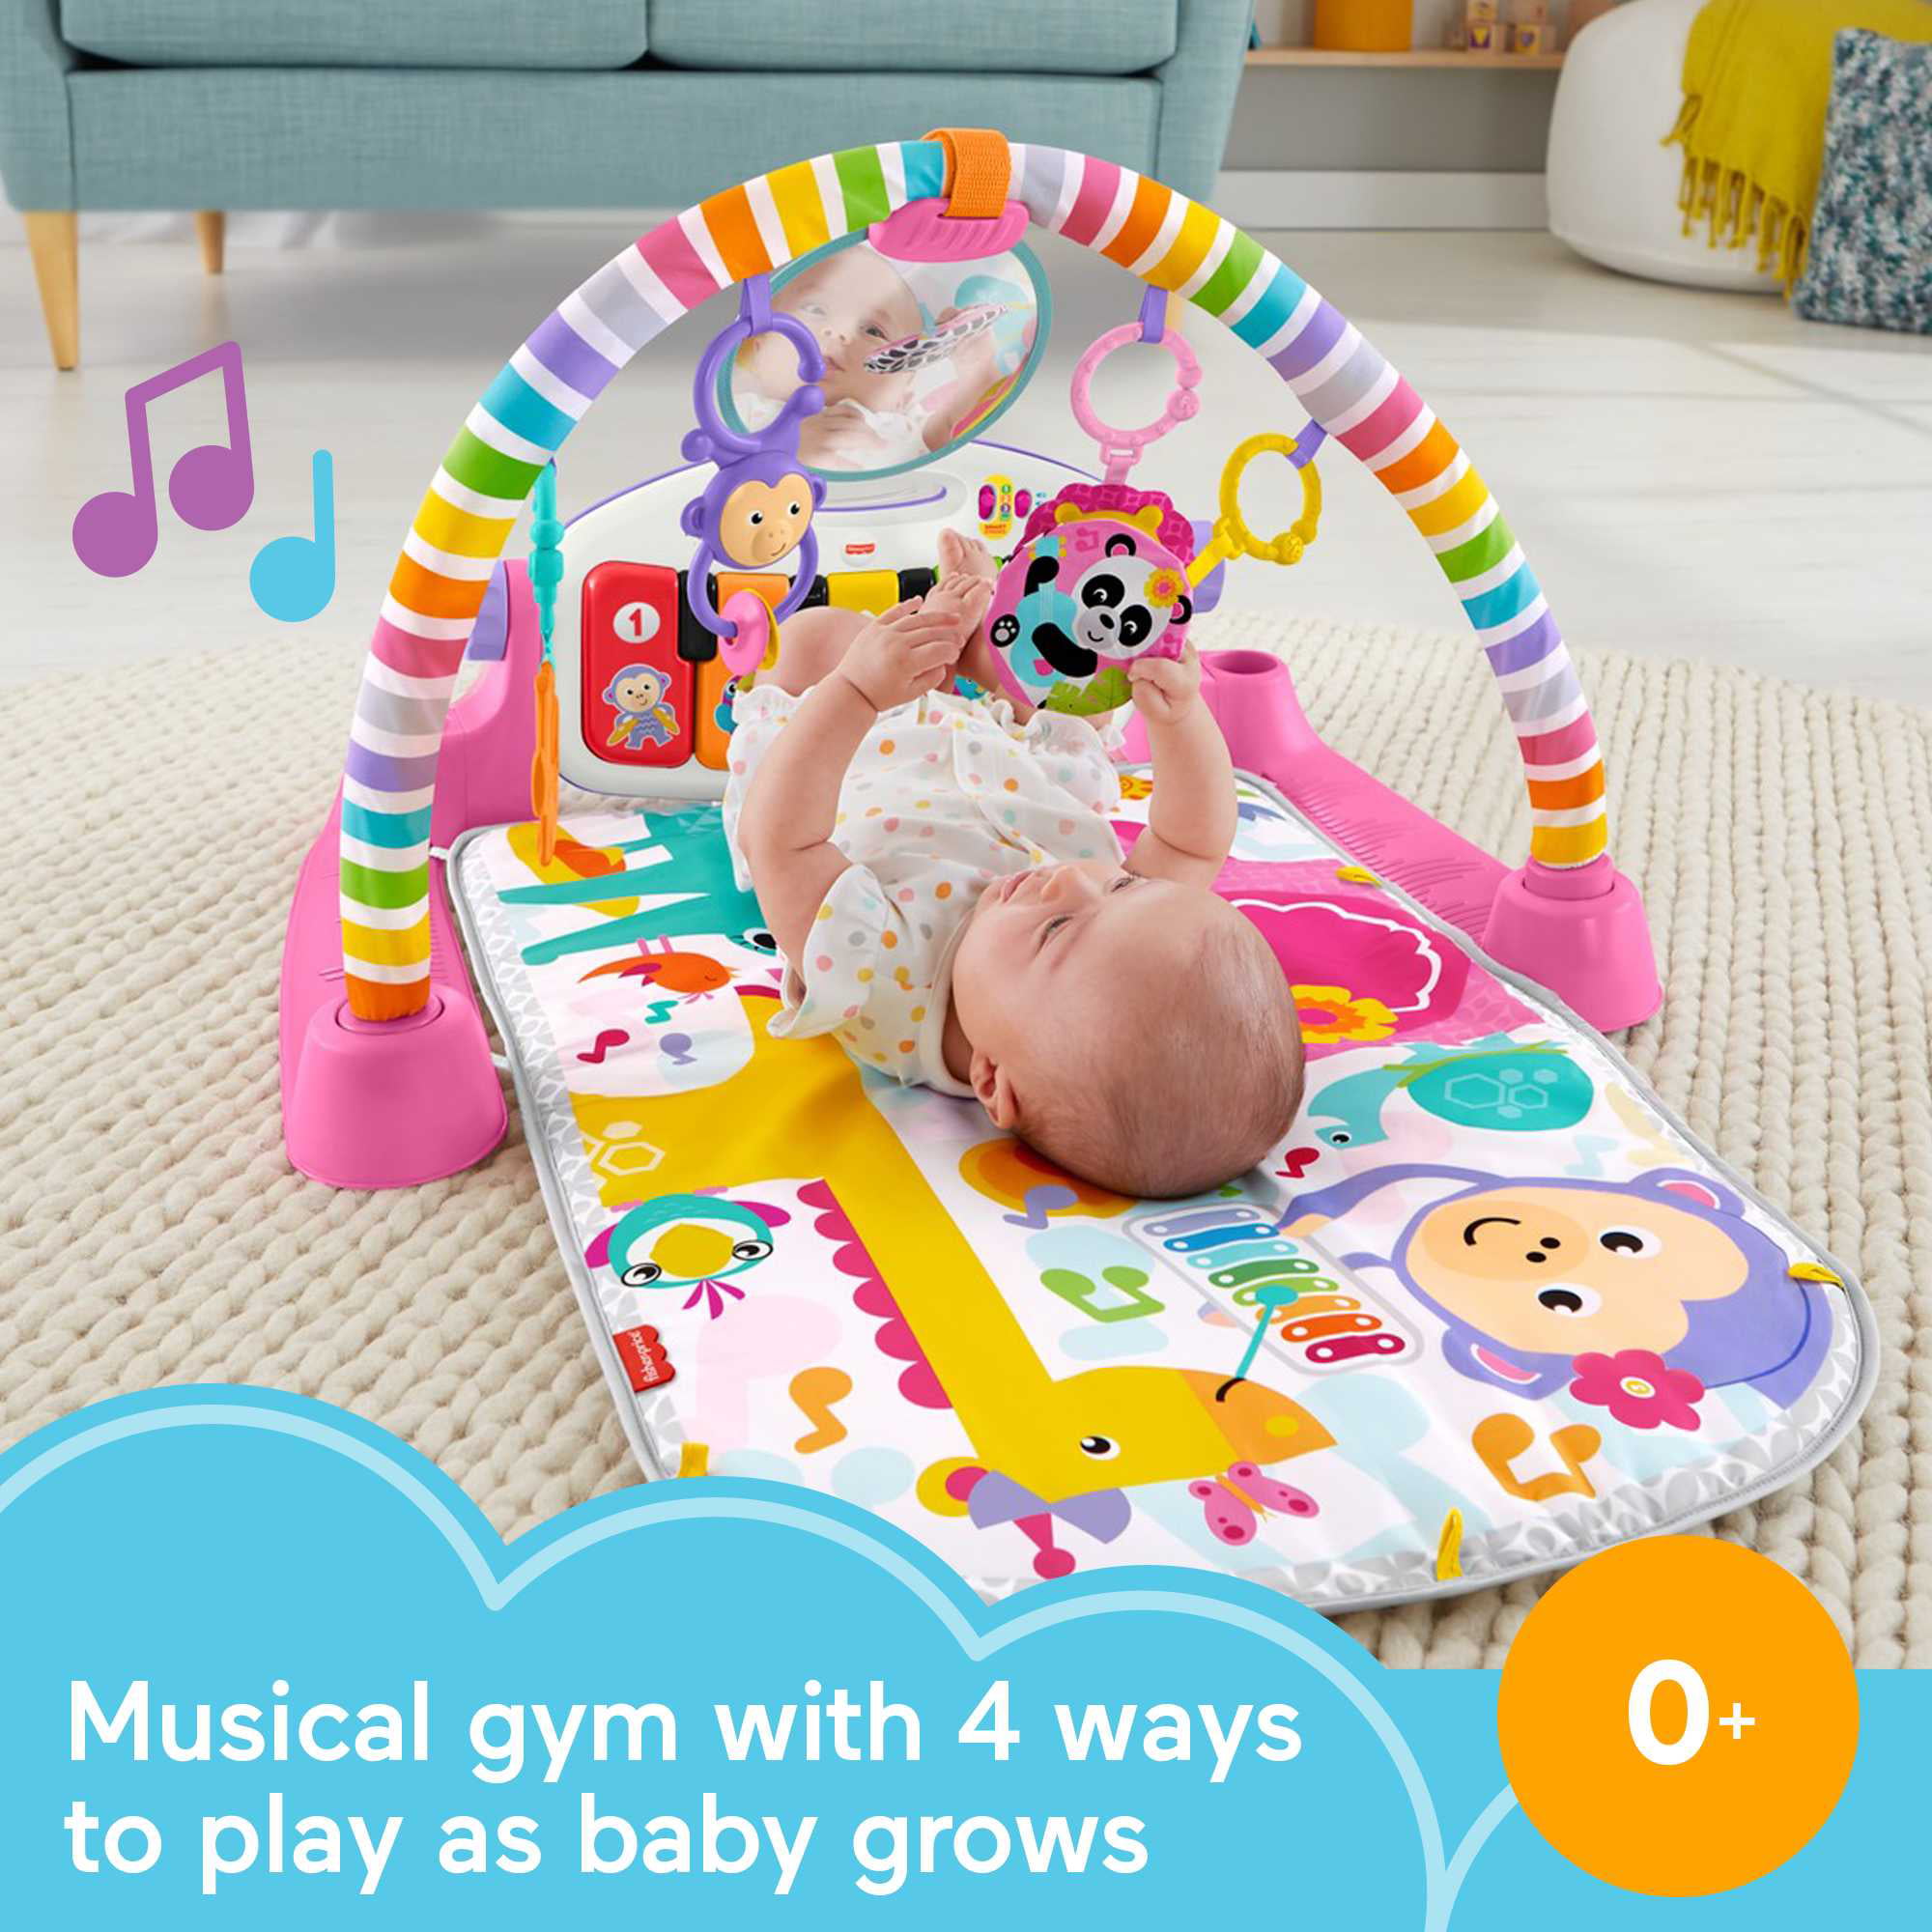 Fisher-Price Deluxe Kick & Play Piano Gym, Pink Musical Play Mat for Baby - 2